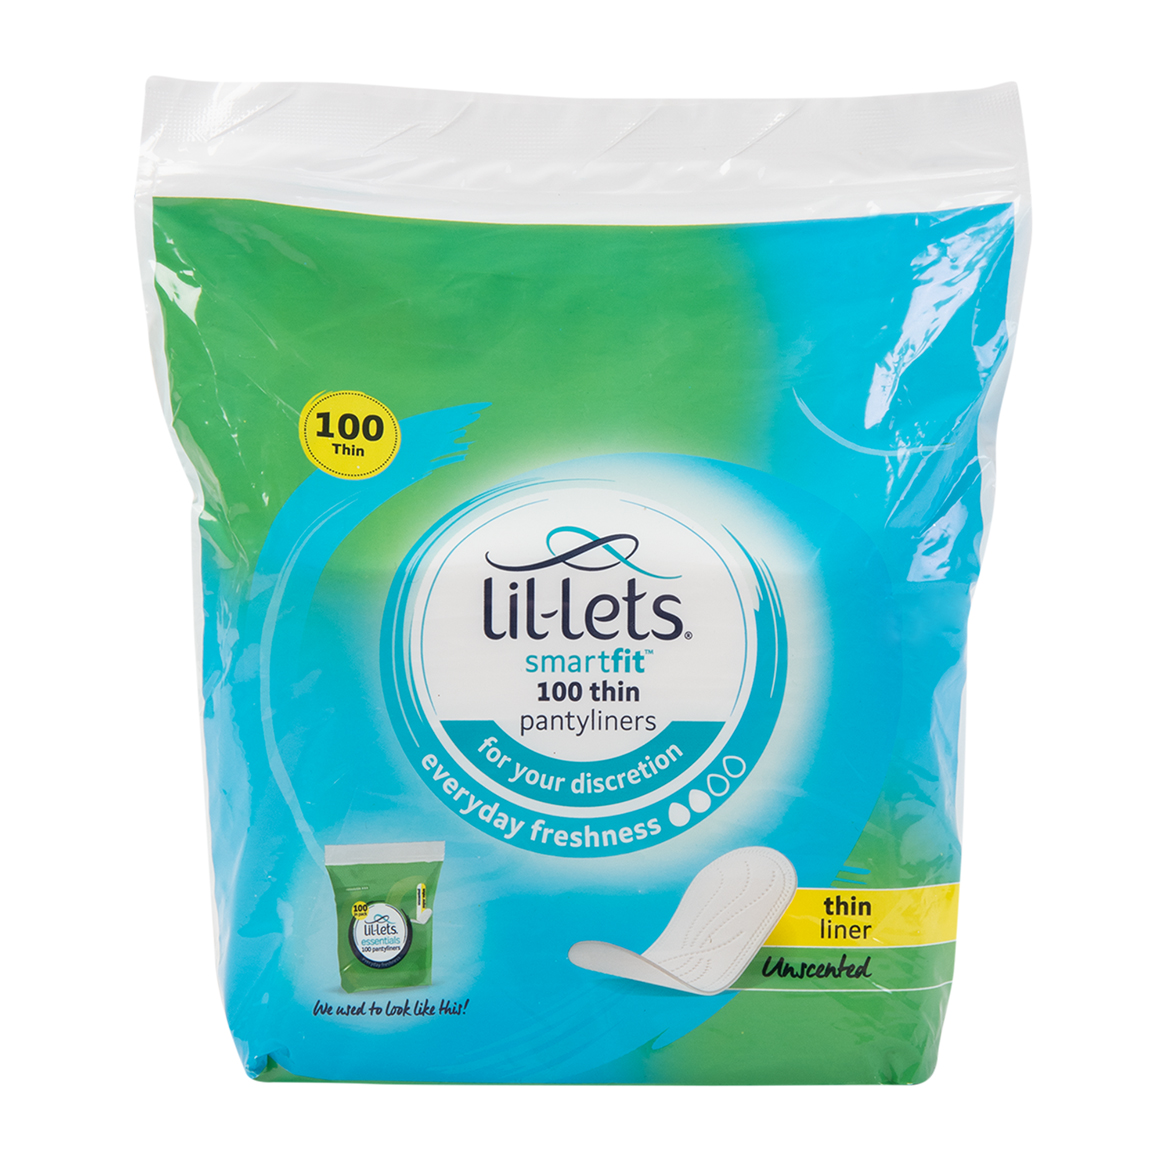 Lil-Lets SmartFit™ Everyday Freshness Thin Unscented Pantyliners 100 pk